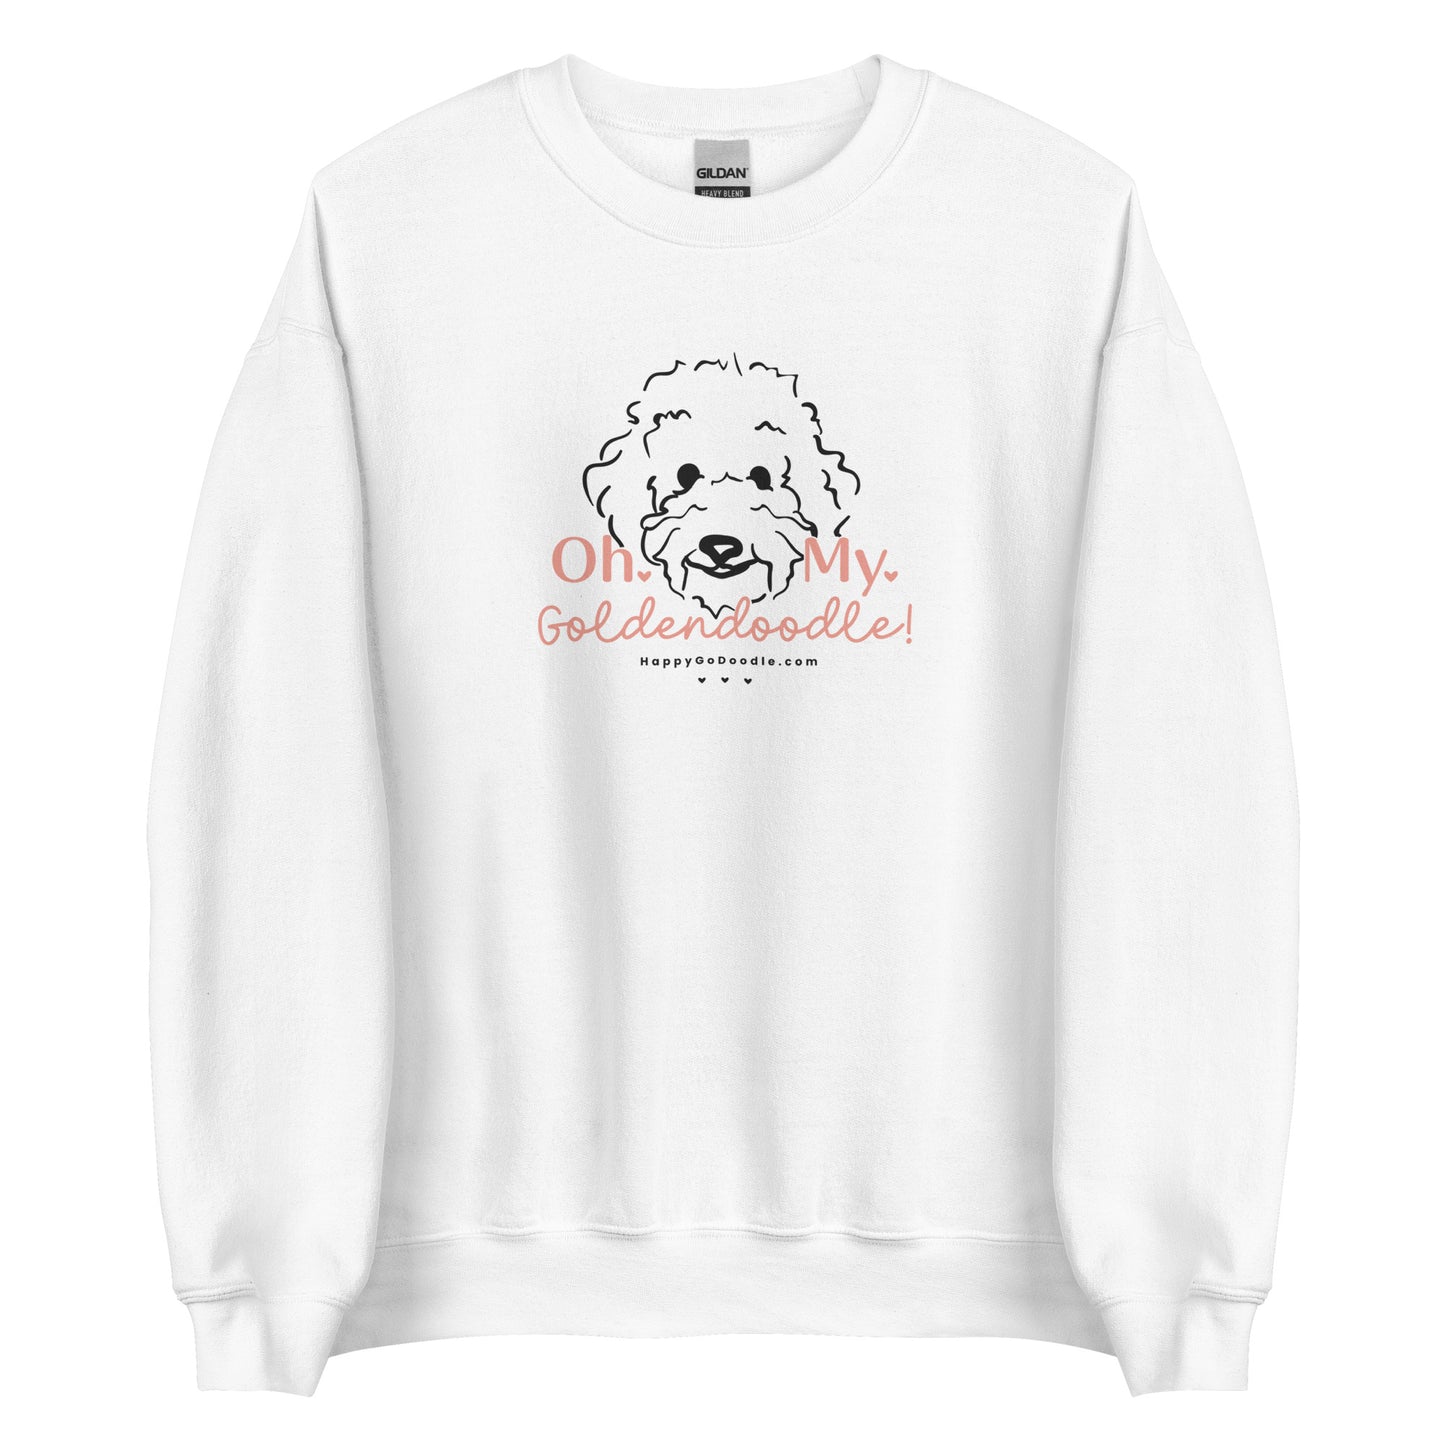 Goldendoodle crew neck sweatshirt with Goldendoodle face and words "Oh My Goldendoodle" in white